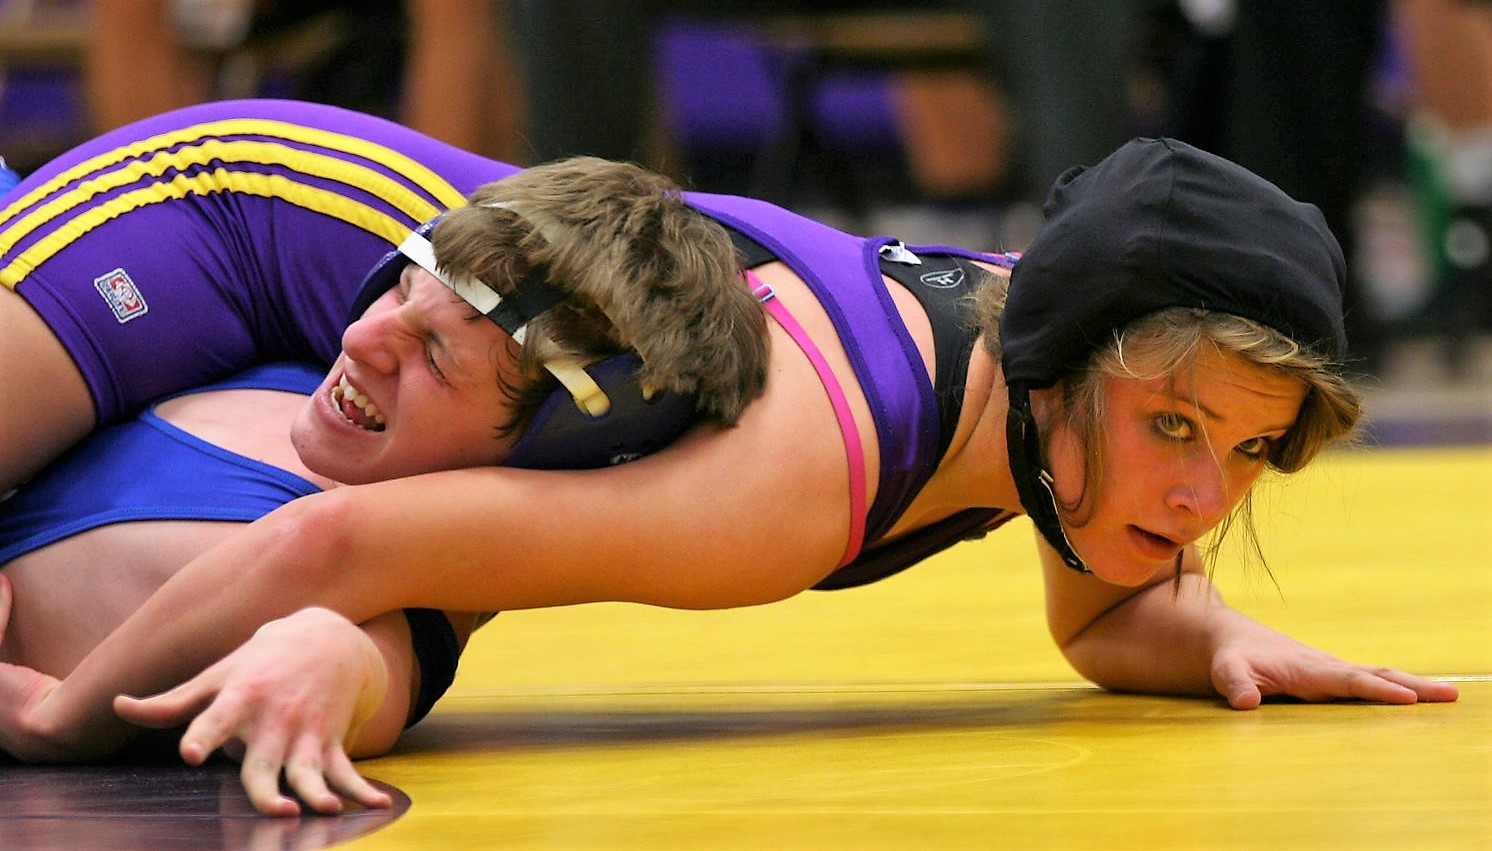 Great moments on the mat - female wrestlers kicking guys' asses.